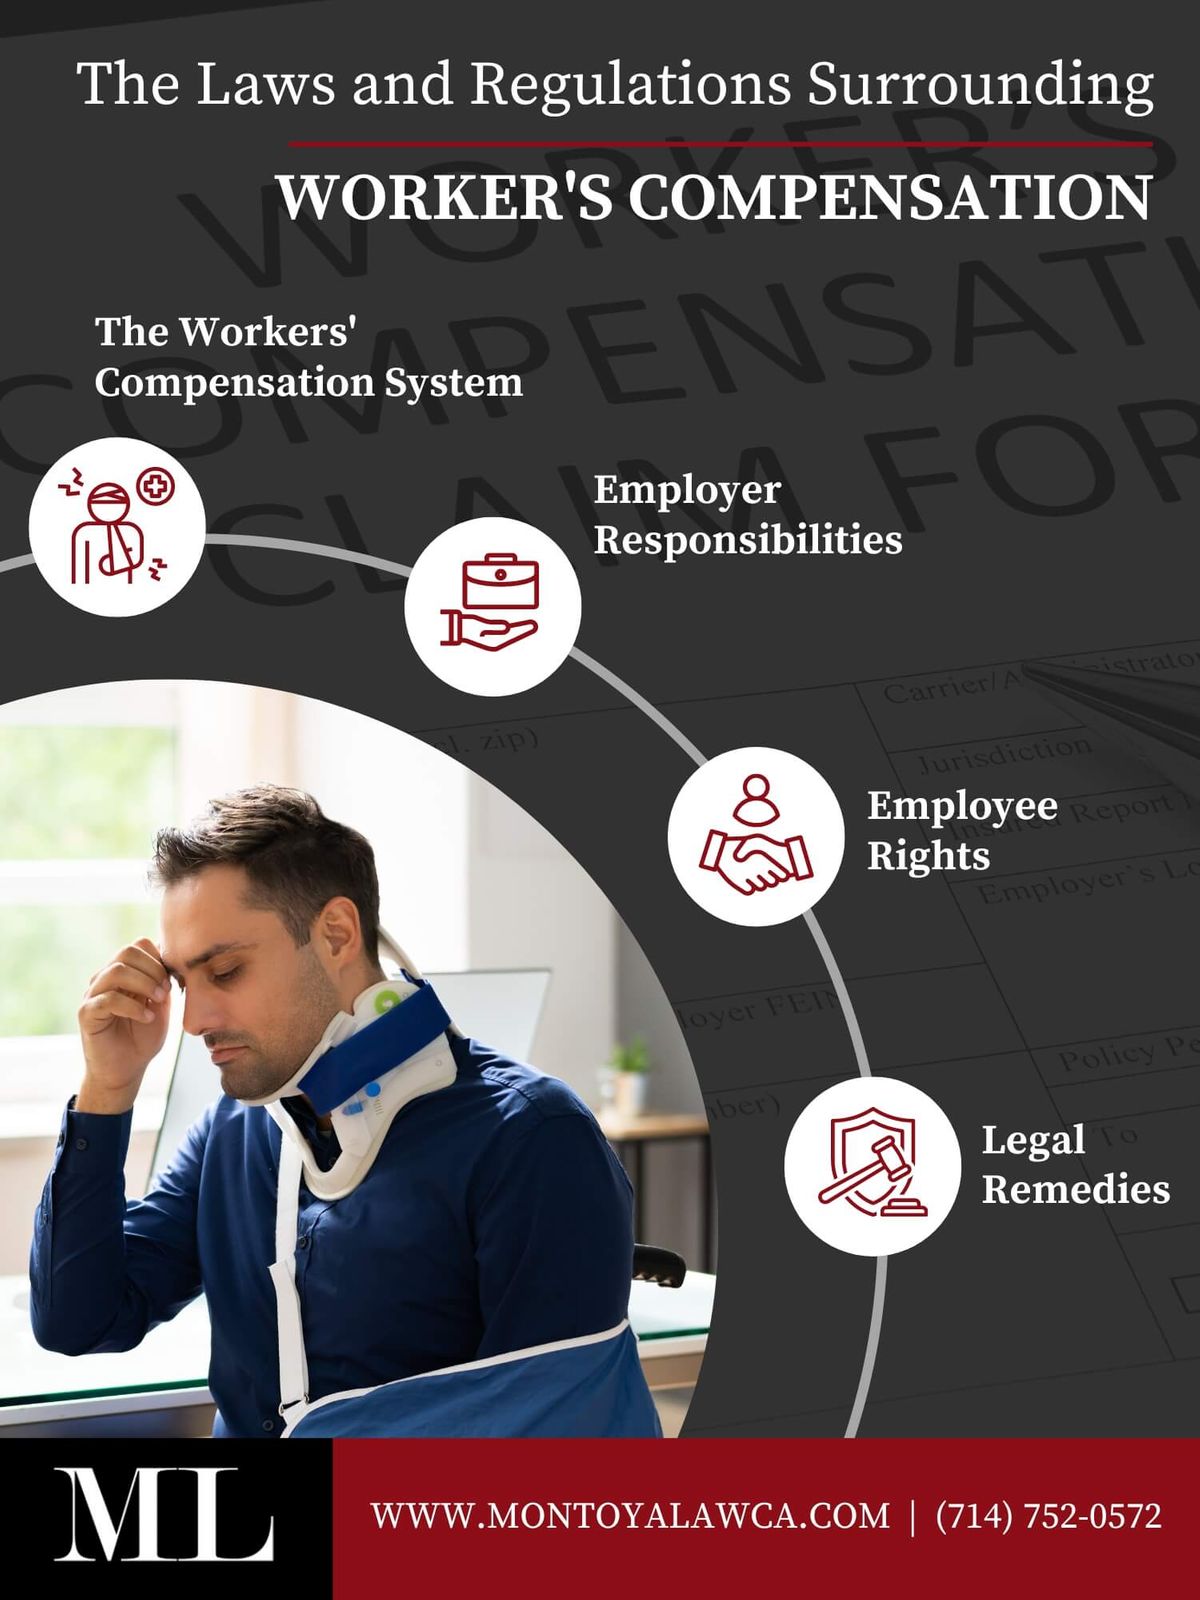 The Laws and Regulations Surrounding Workers Compensation - Infographic